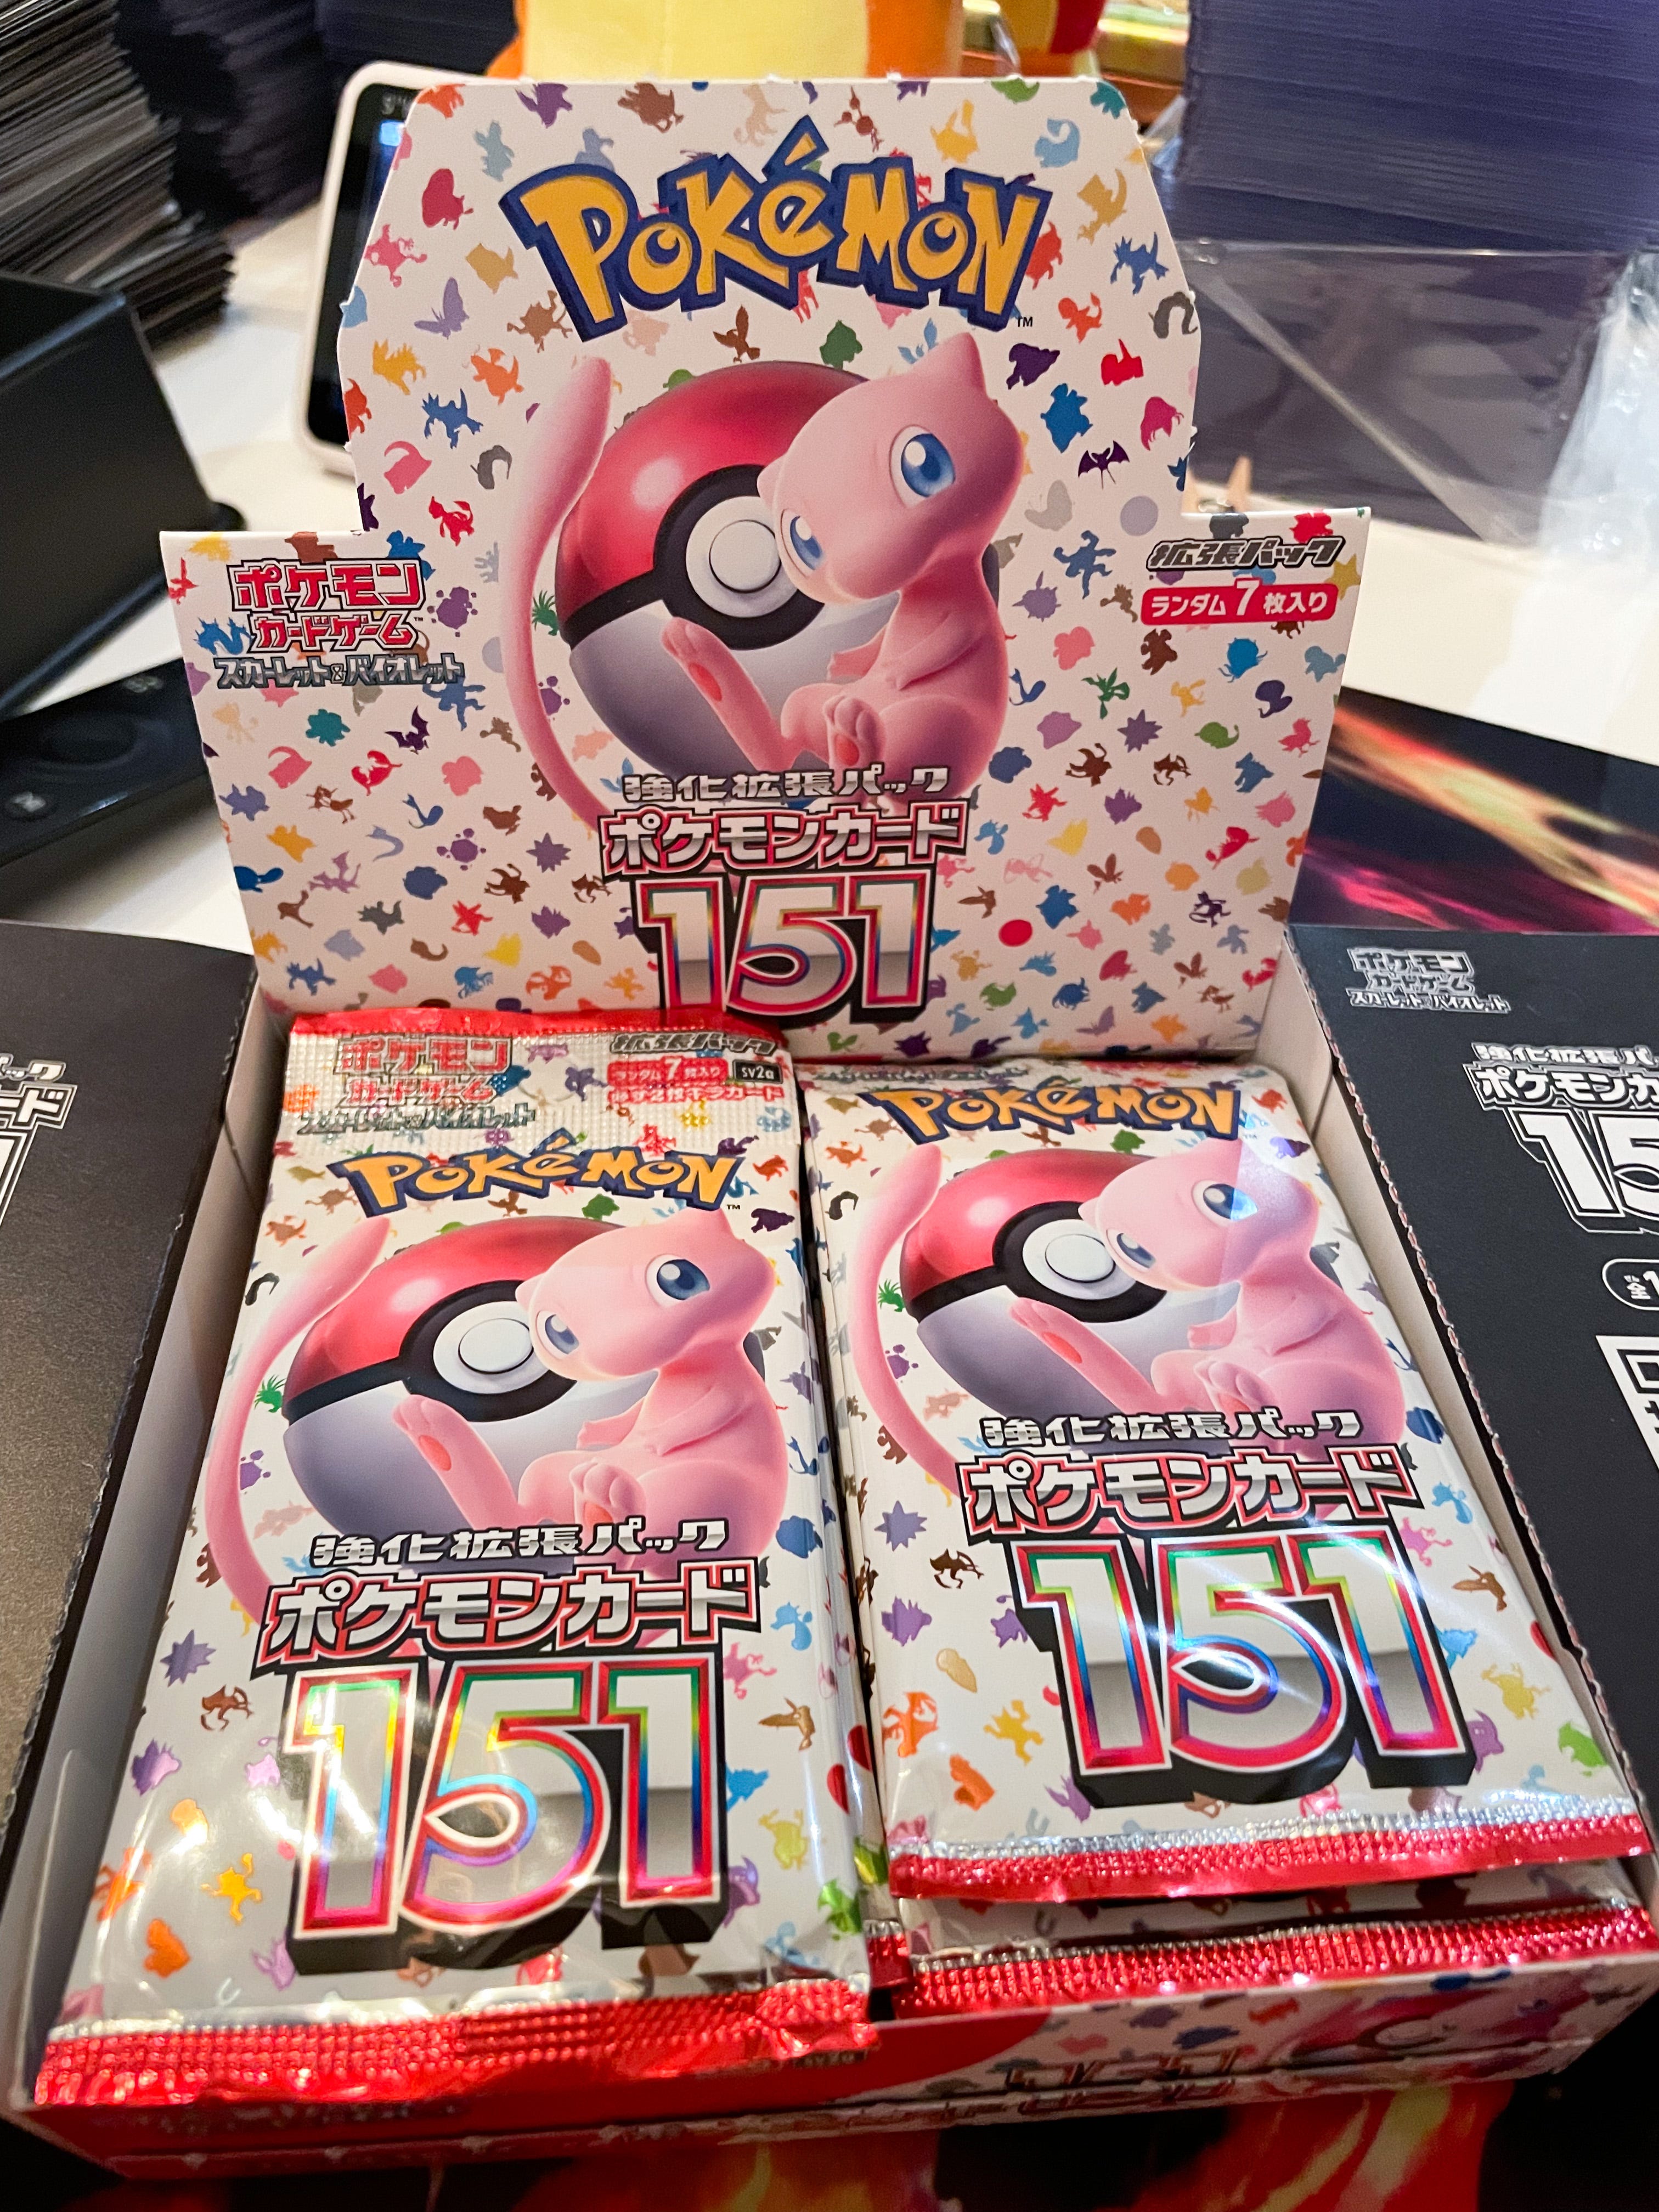 My Best Pulls from Japanese Pokemon TCG SV2a 151 Booster Box